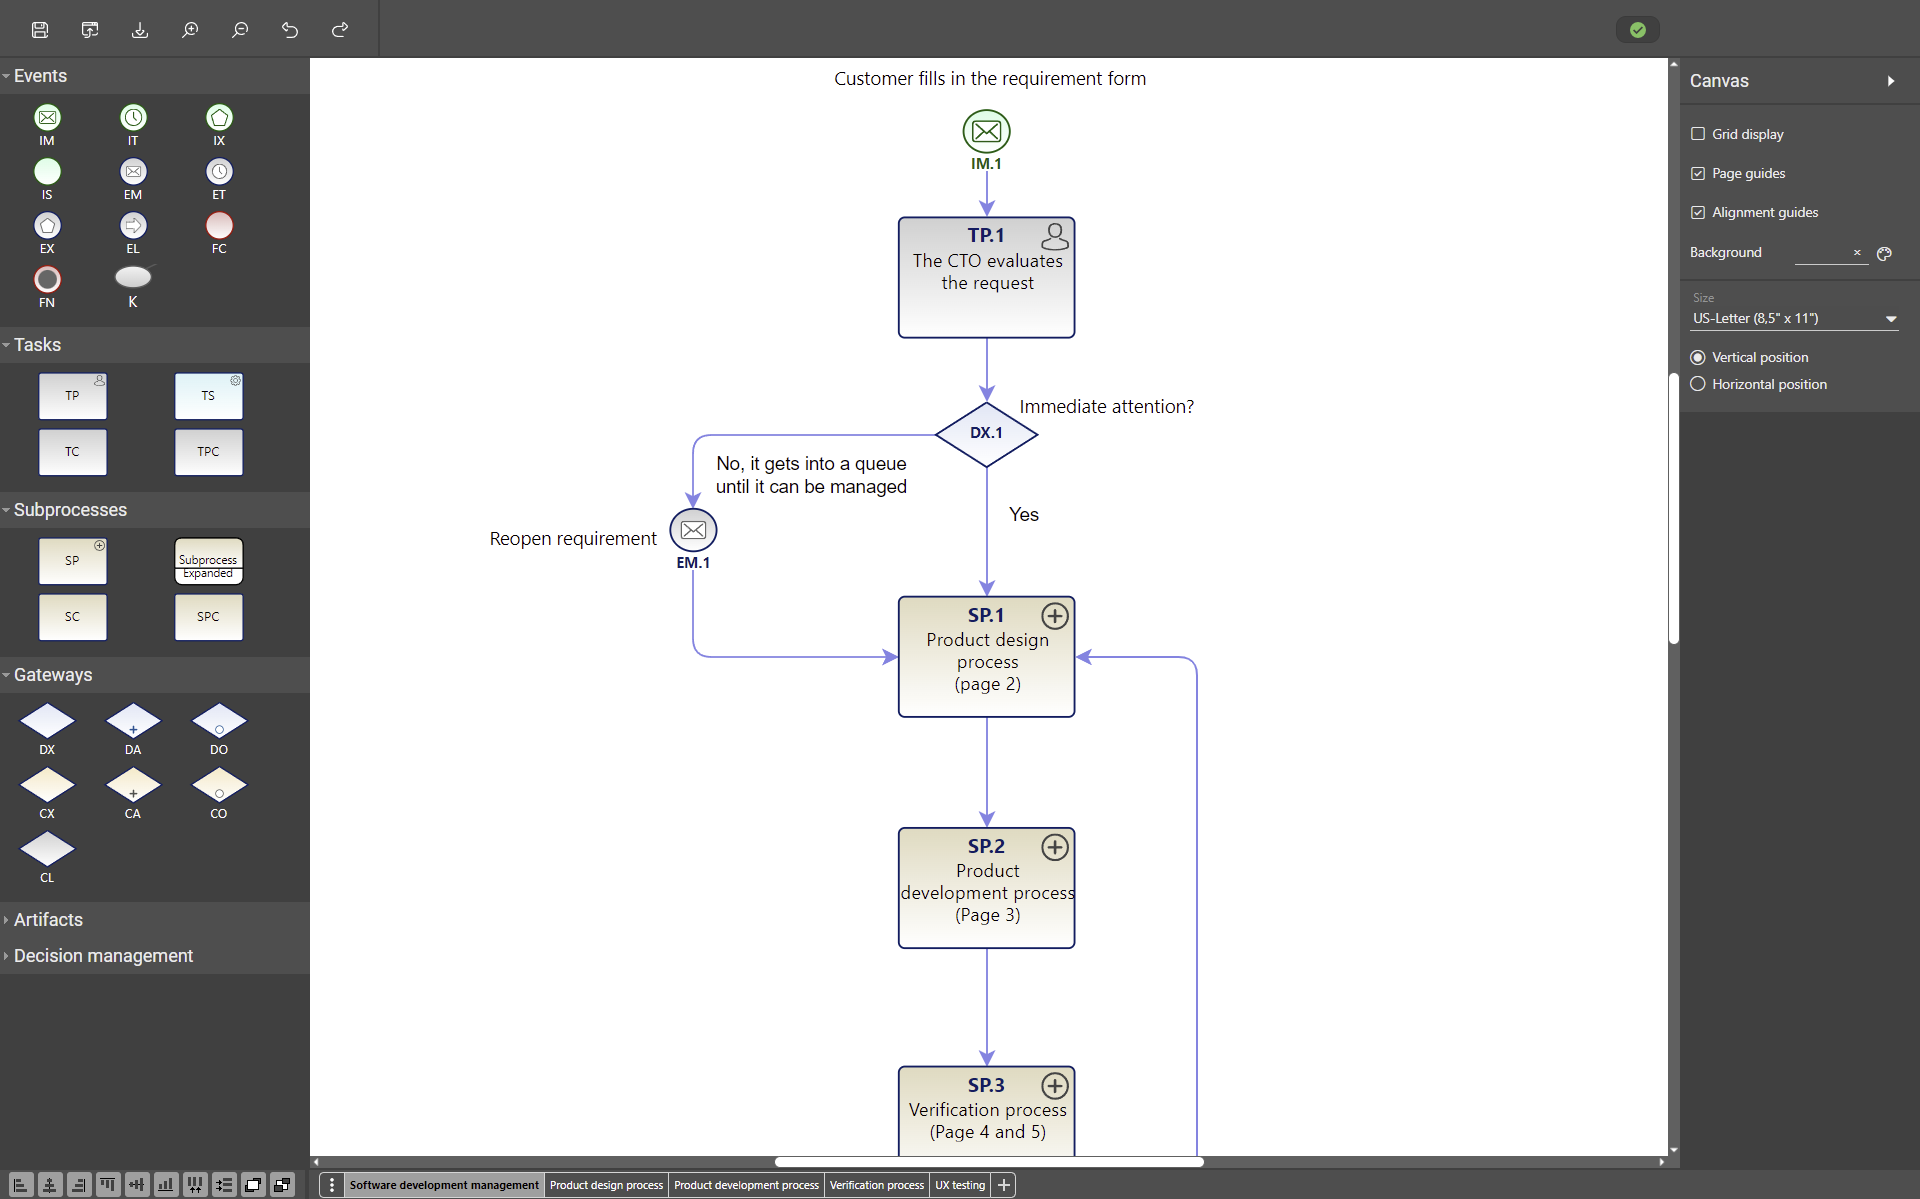 AuraQuantic Modeler has a wizard to help the user design the flows.